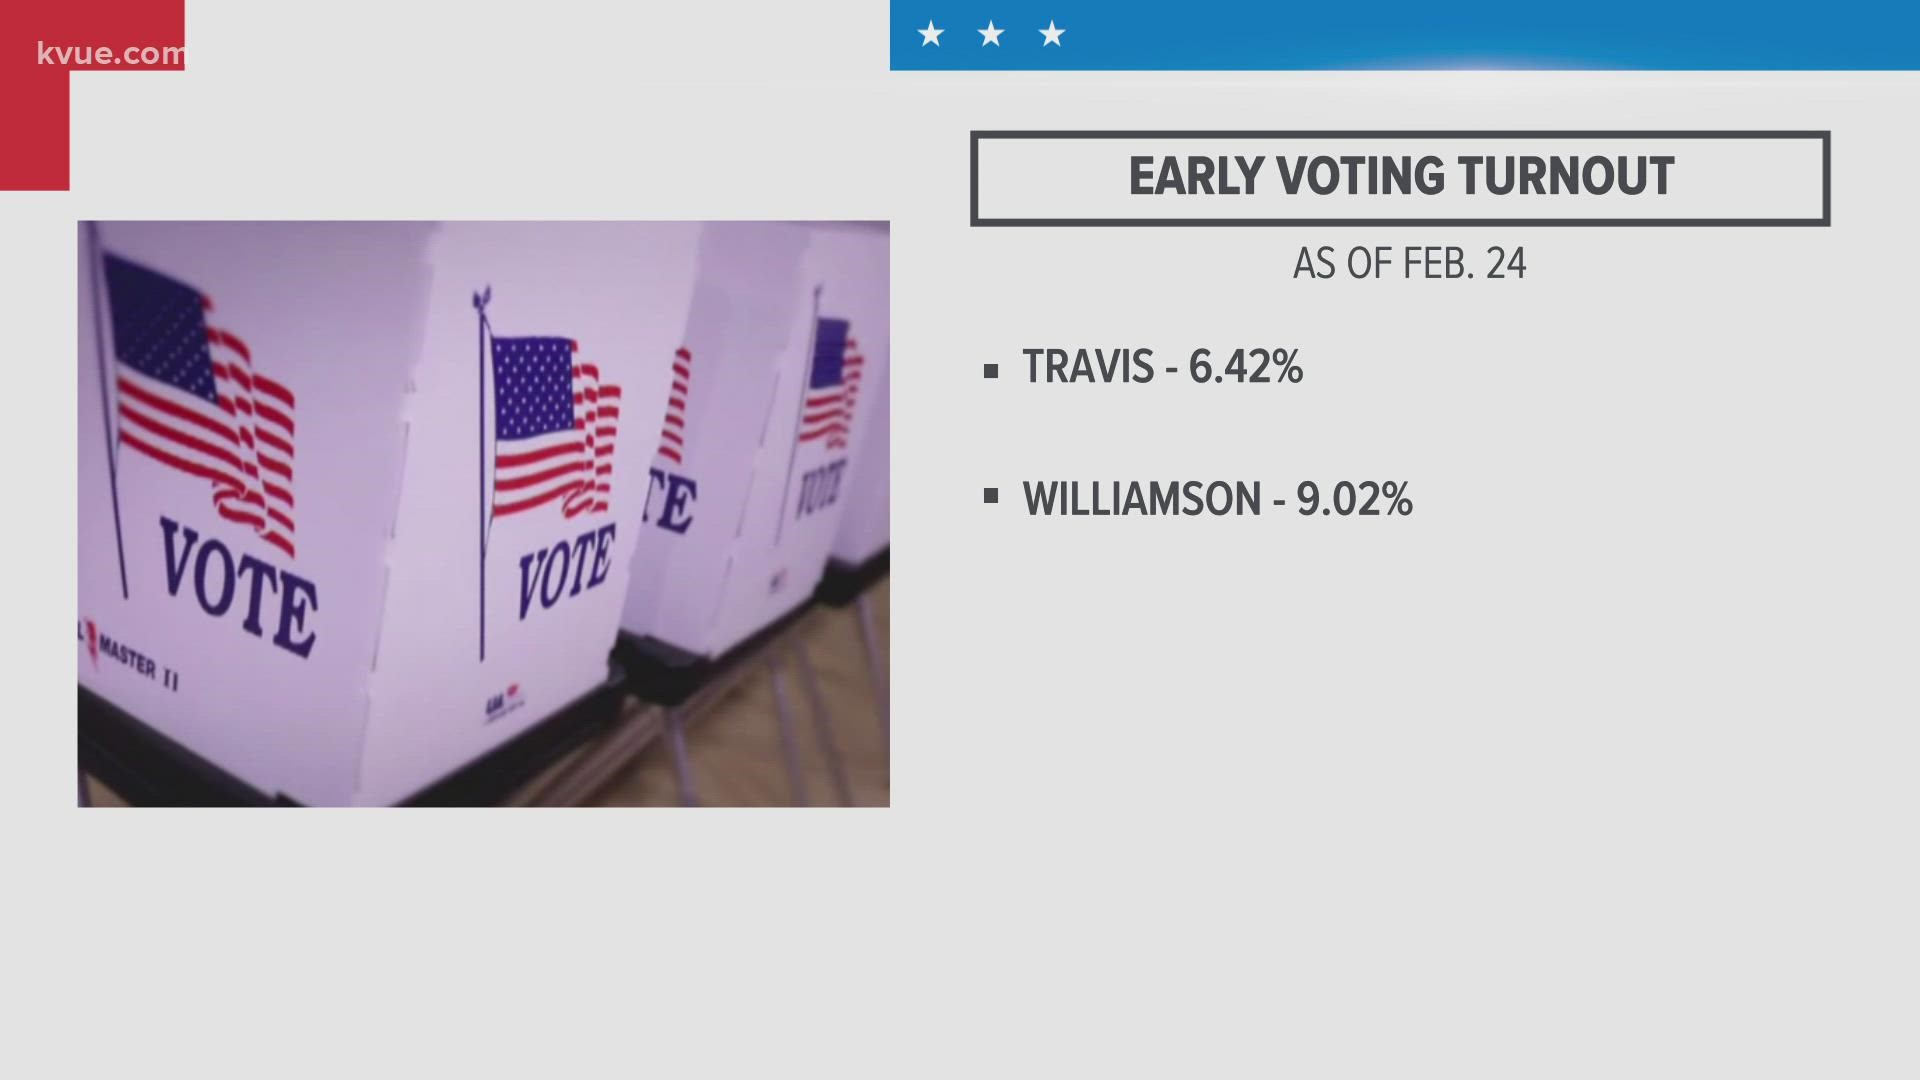 The Texas Secretary of State's office reported that slightly more than 7% of voters had cast ballots as of Feb. 24.